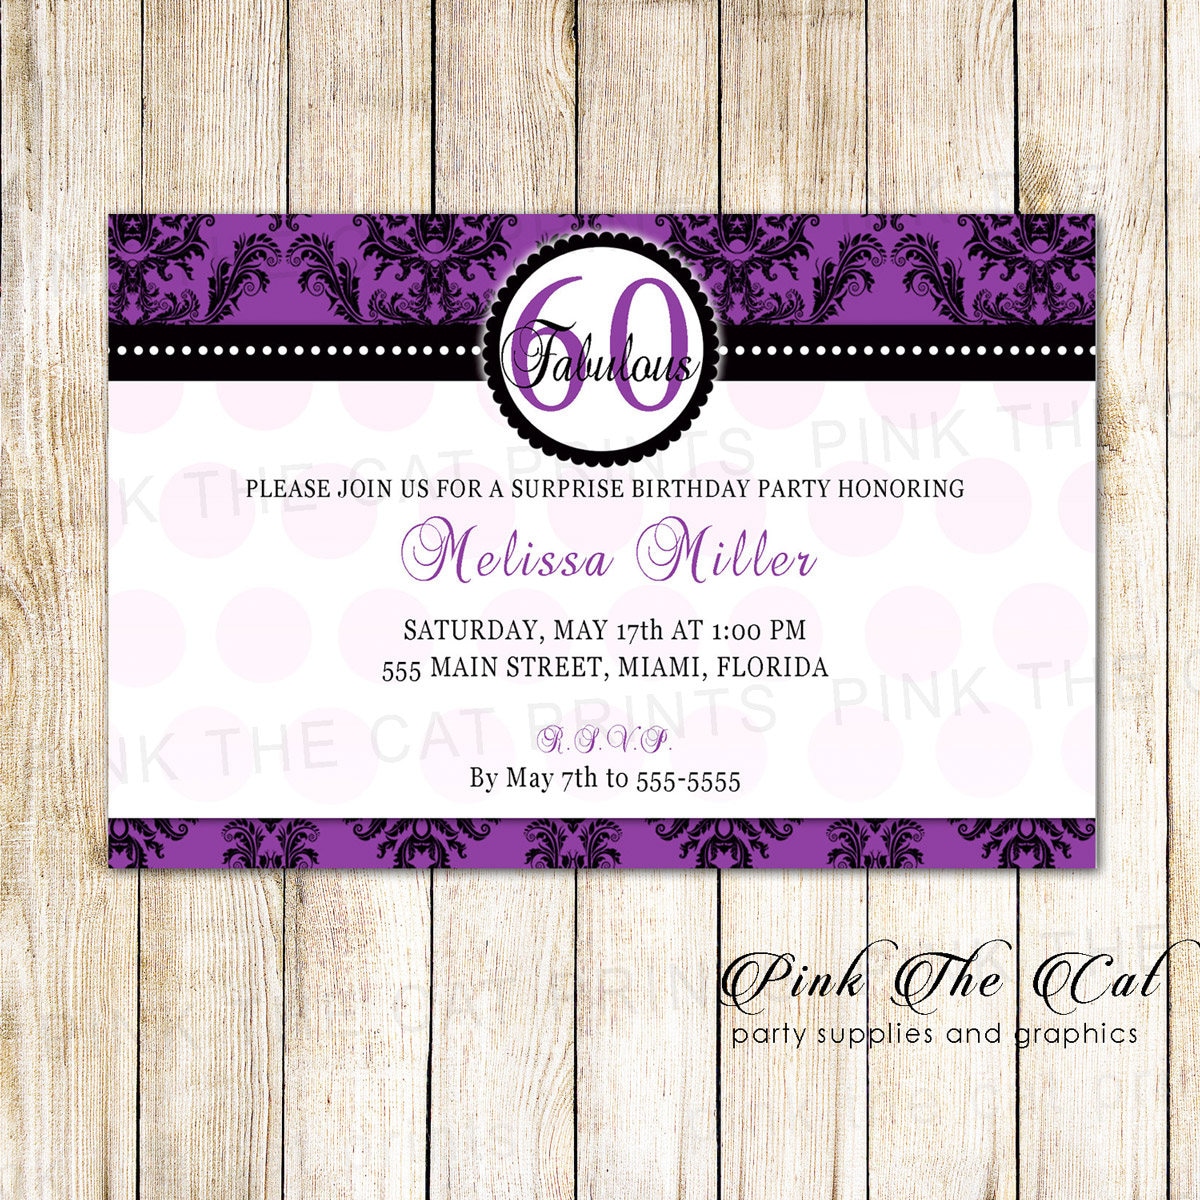 Adult Birthday Invitation - Vintage Purple 60Th Party Any Age 60 & Fabulous Invite Also Anniversary Printable Personalized